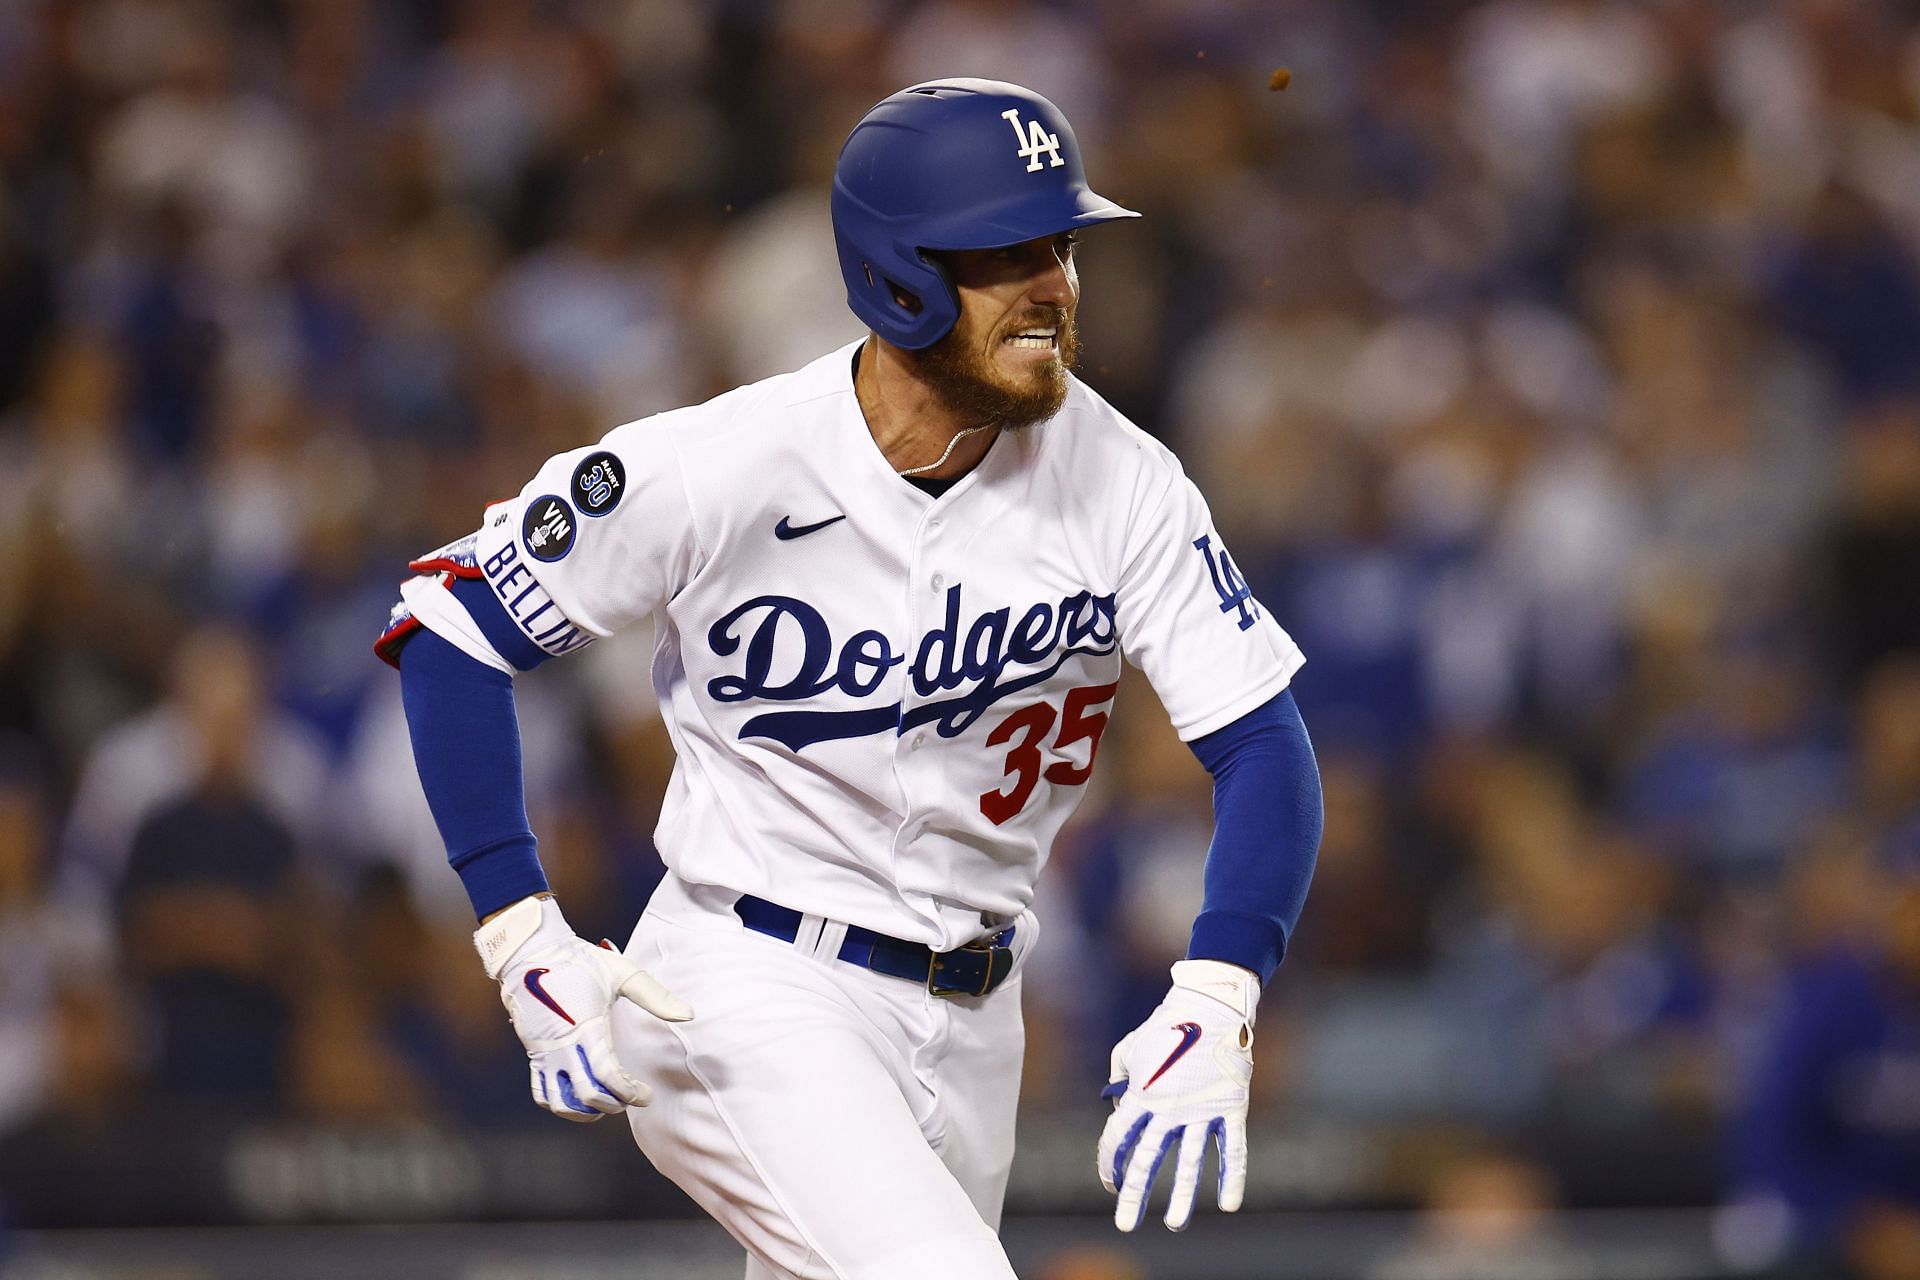 “I think what people don’t realize is Altuve stole an MVP from Judge in ’17. Everybody knows they stole a ring from us” - When Cody Bellinger slated the Astros for using dishonest means on their path to success